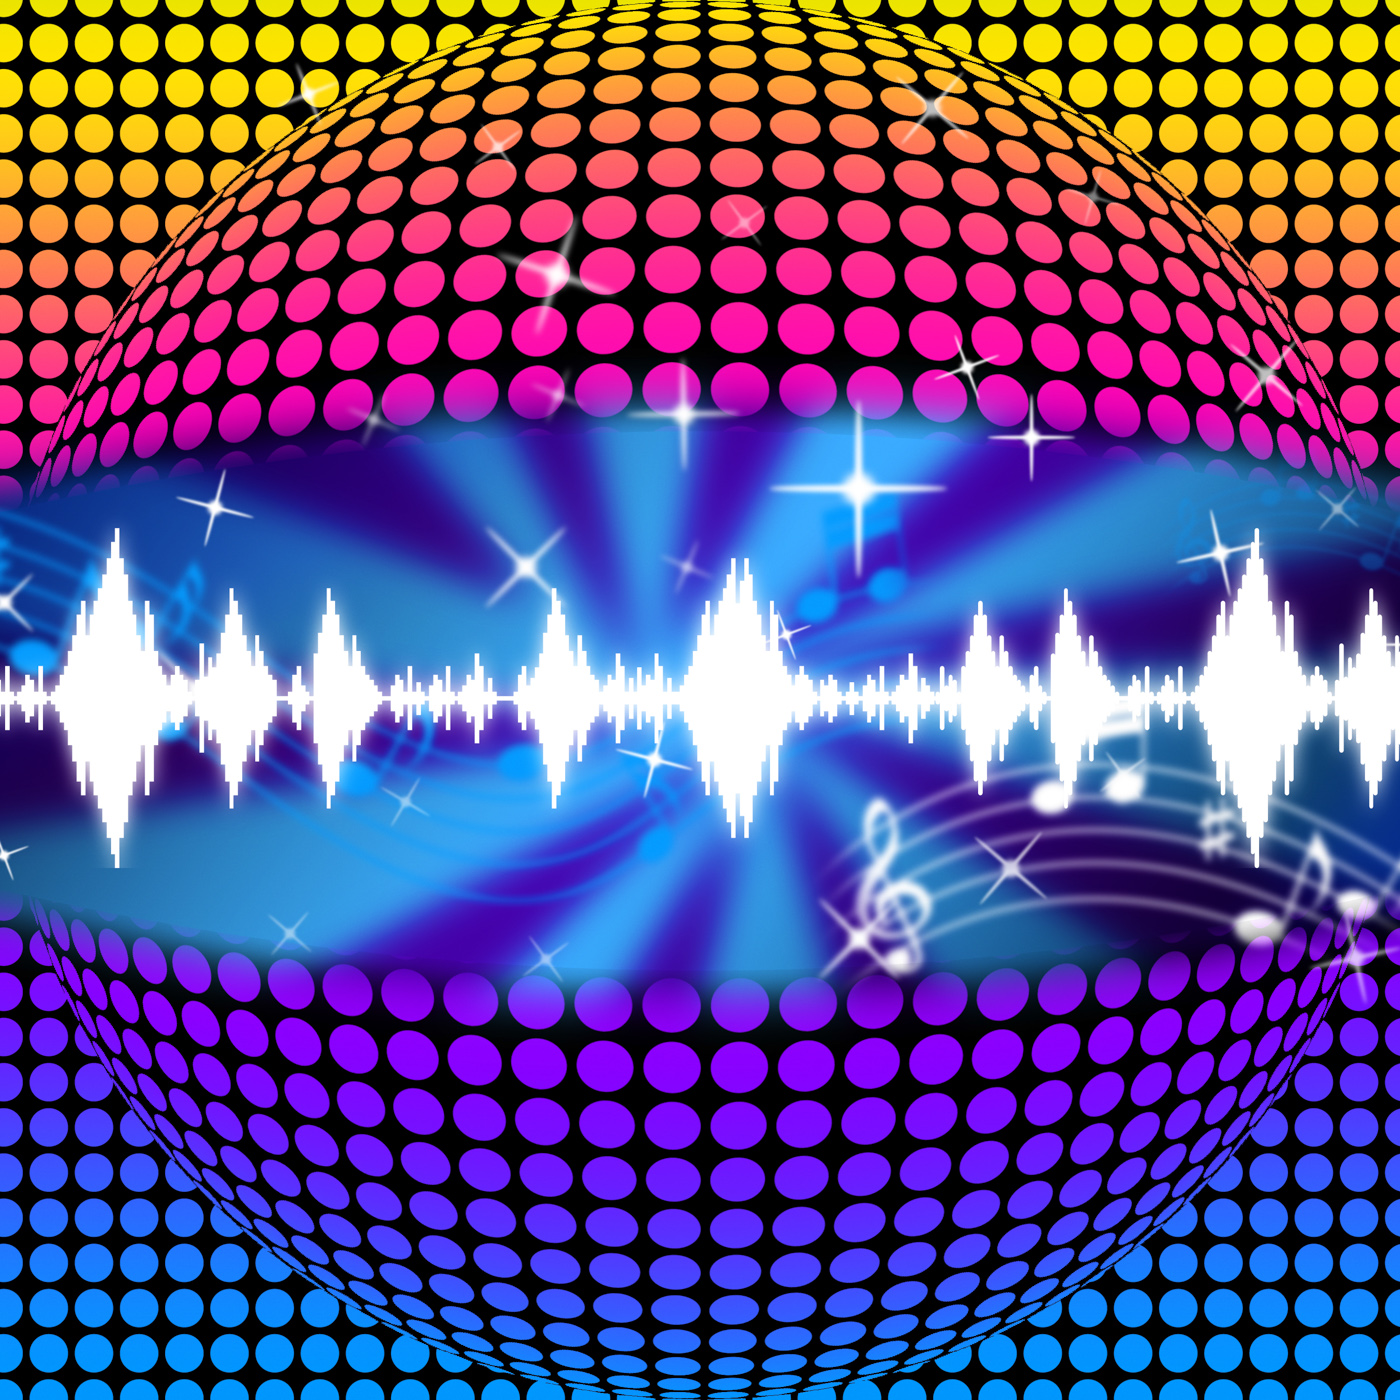 Music disco ball background means soundwaves and partying photo